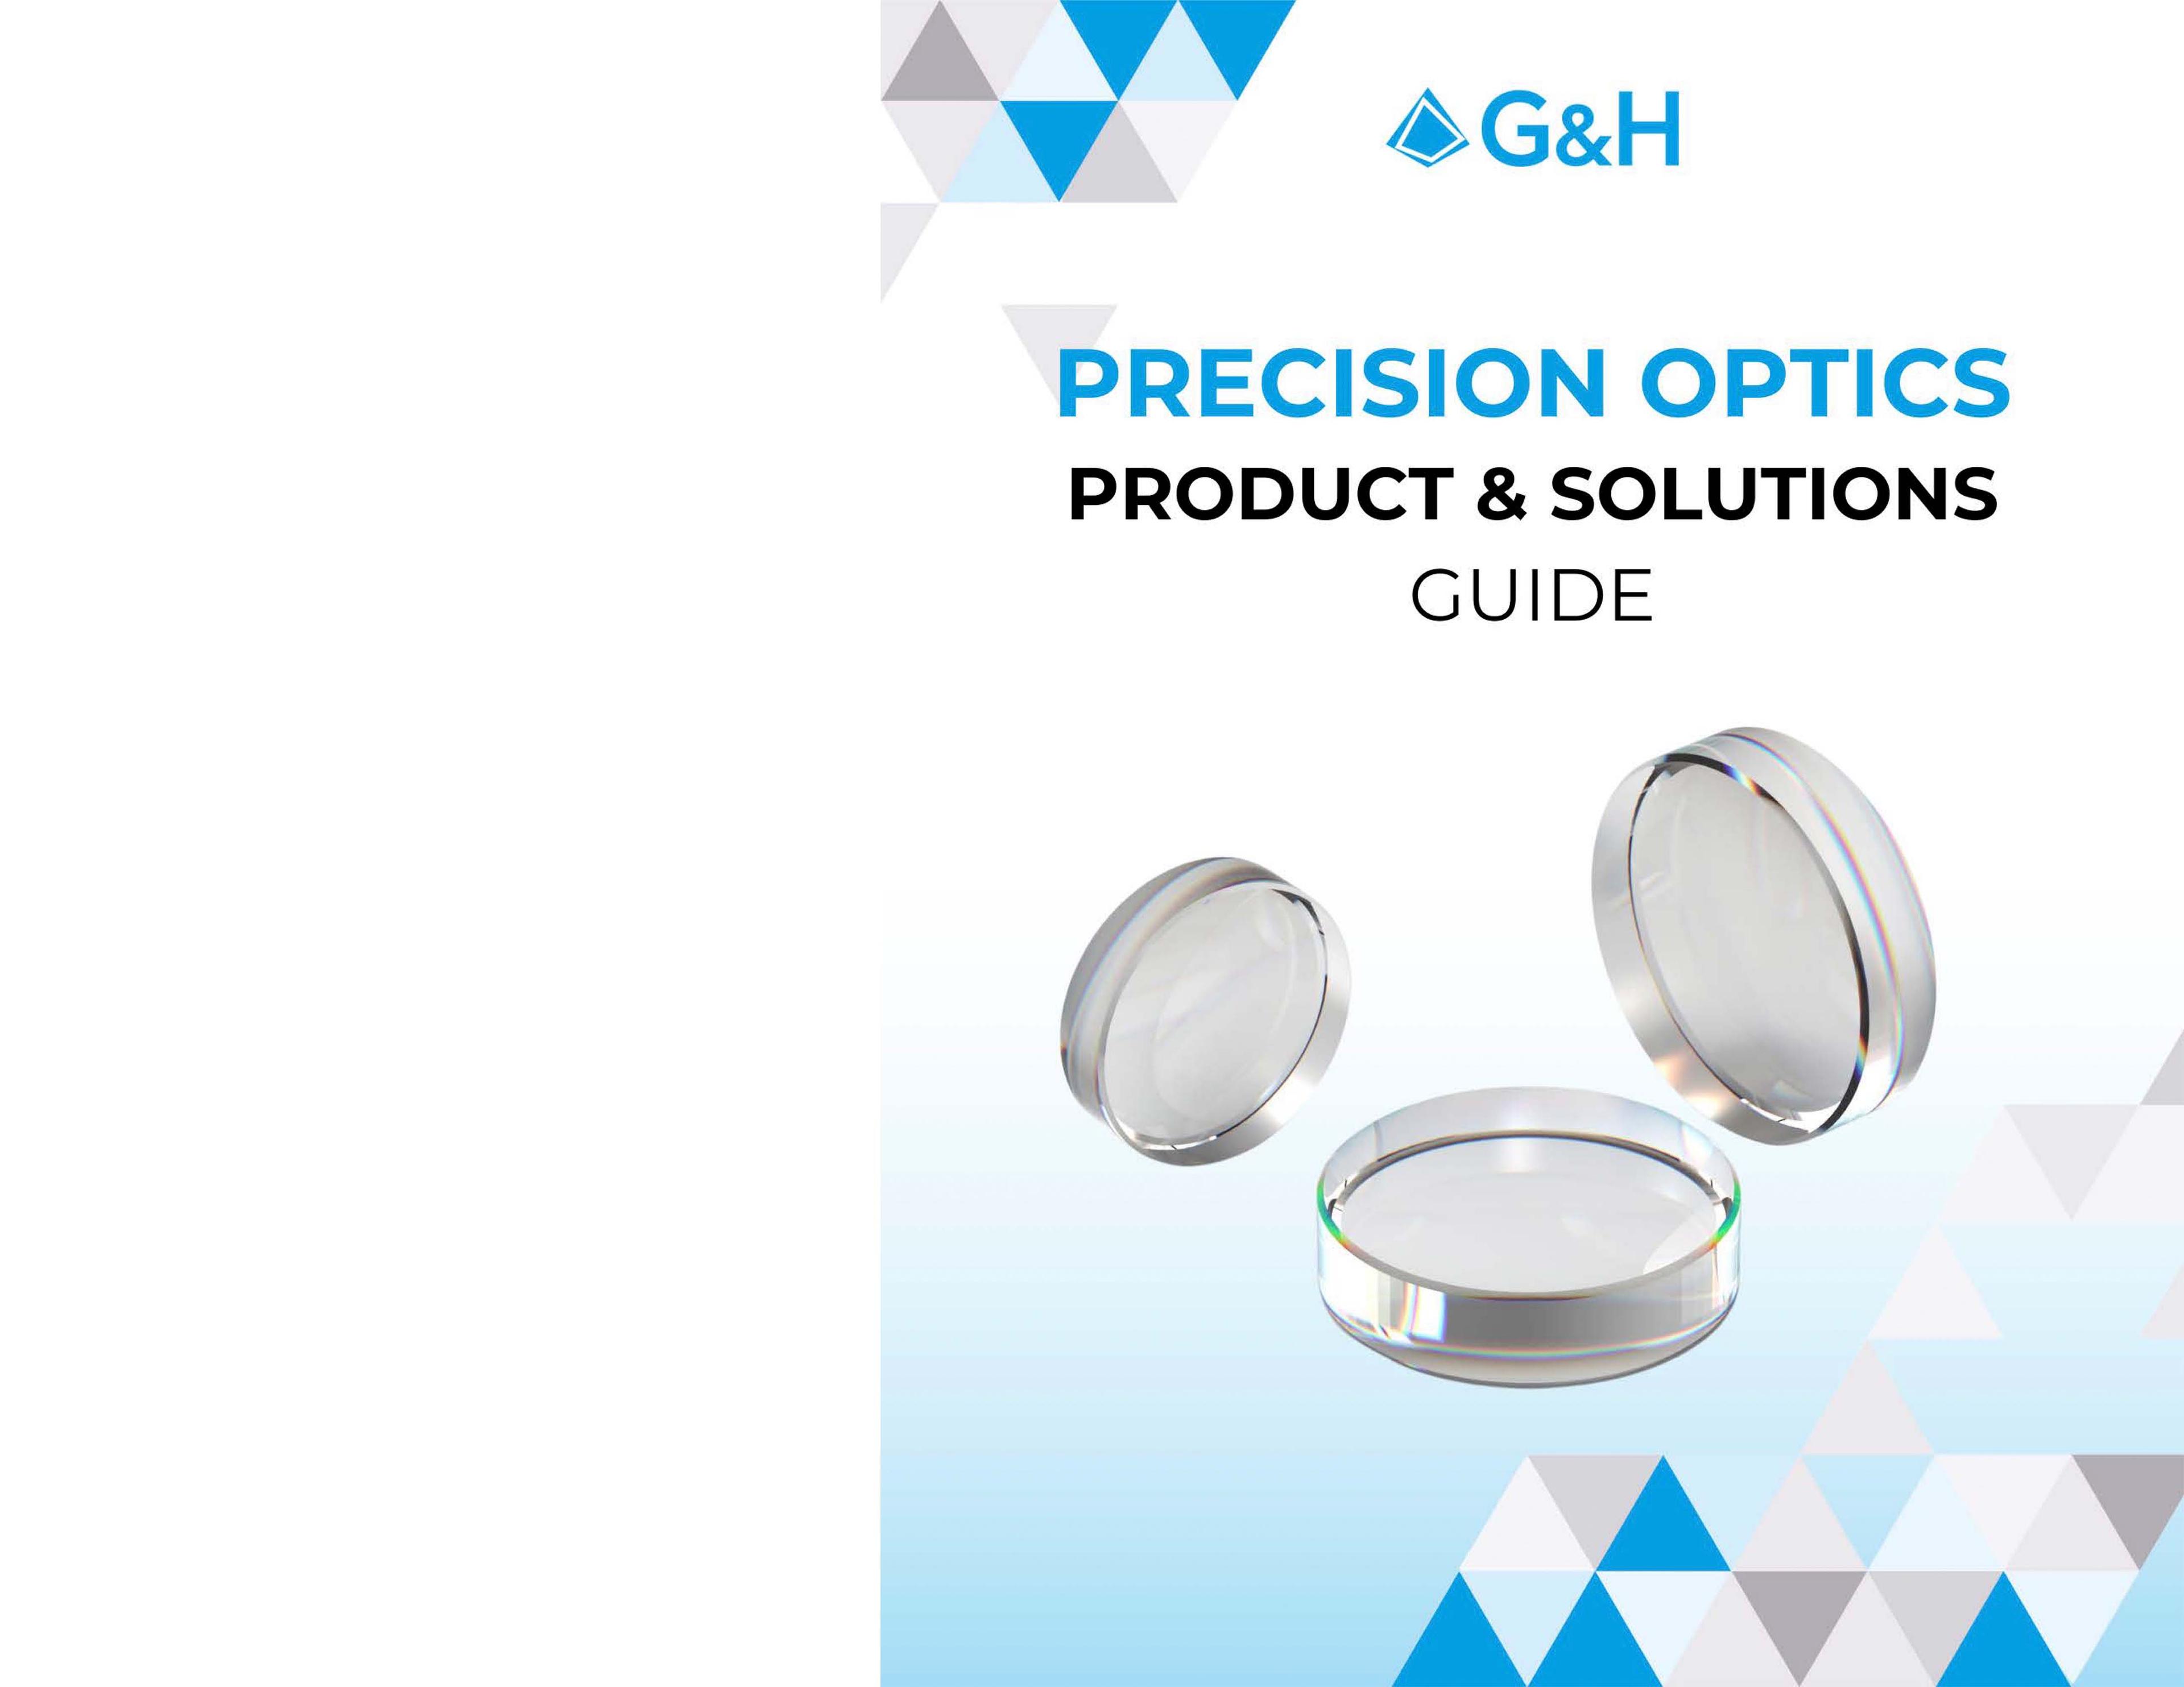 G&H Product & Solutions Guide - Precision Optics Page 01